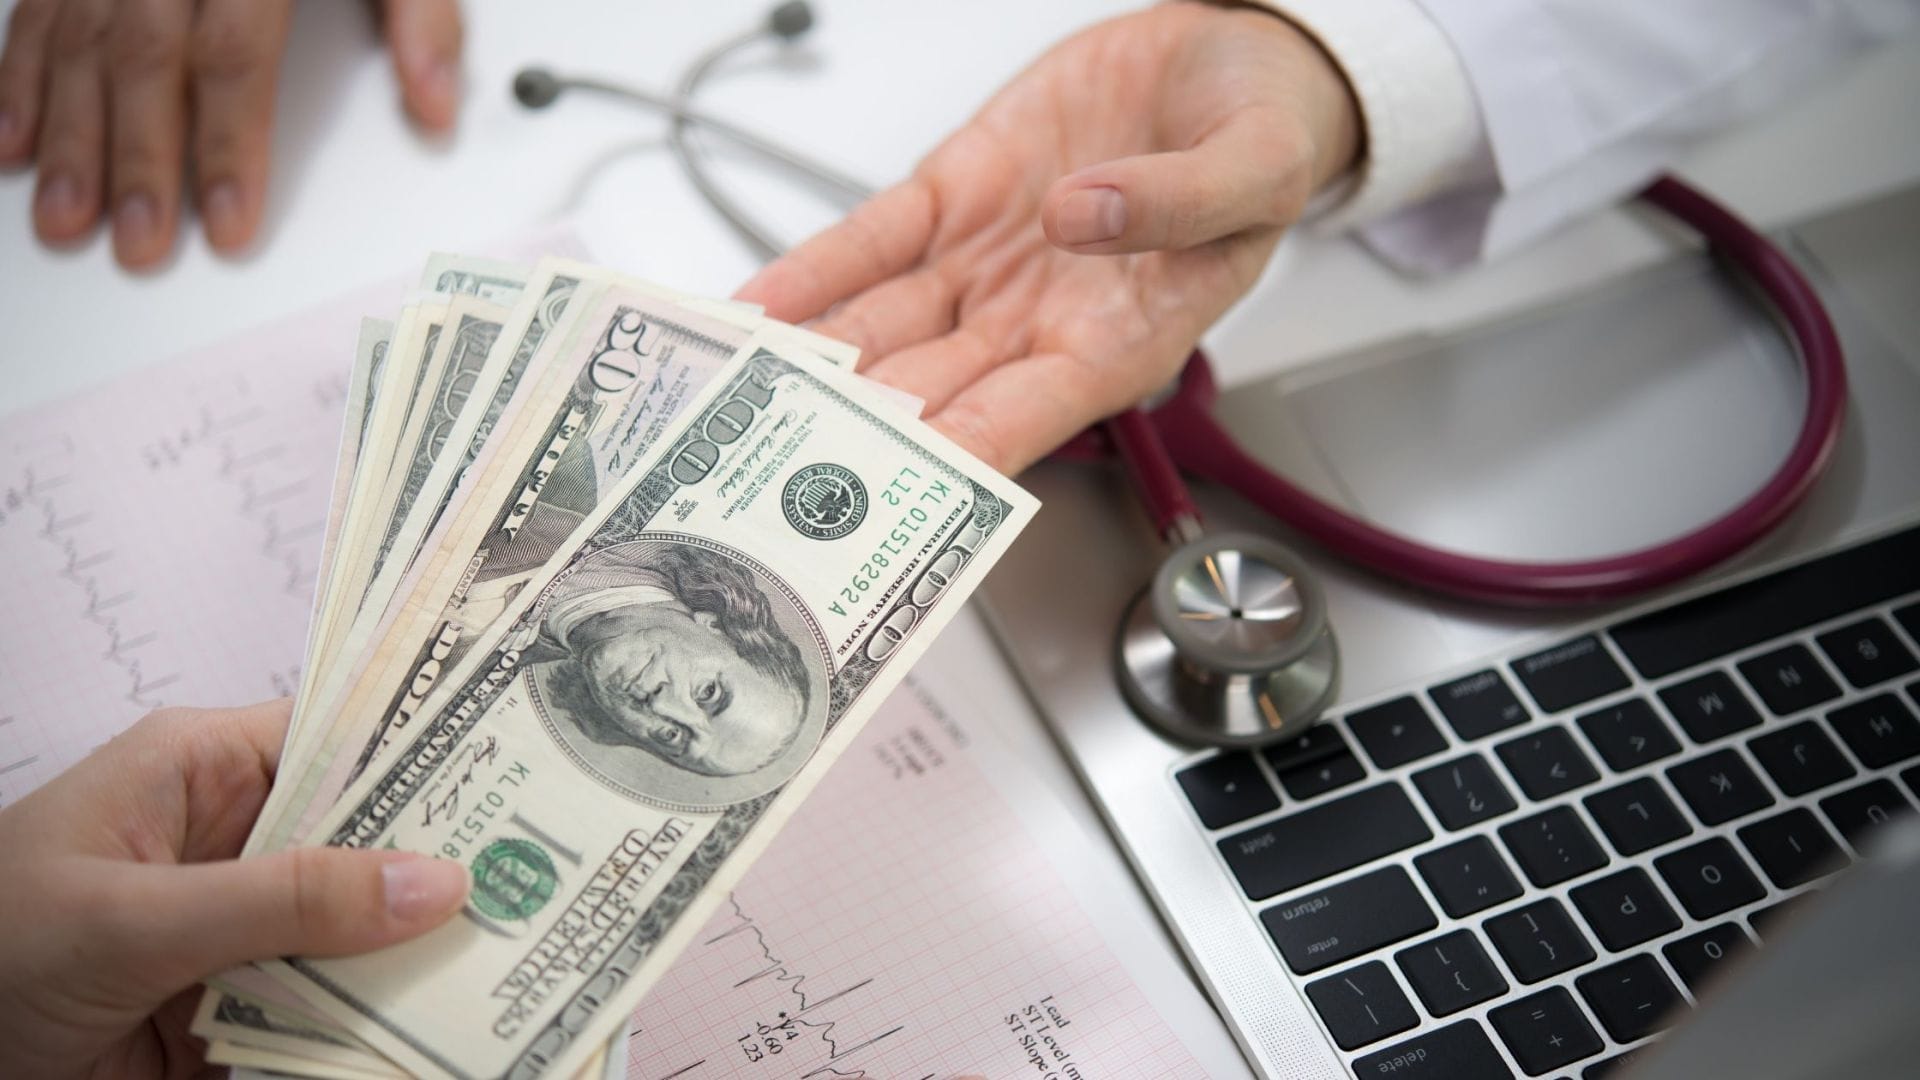 A patient's hand receiving cash, implying financial assistance for liver cancer treatment, with a doctor's stethoscope and laptop in the background, highlighting the intersection of medical care and treatment affordability.